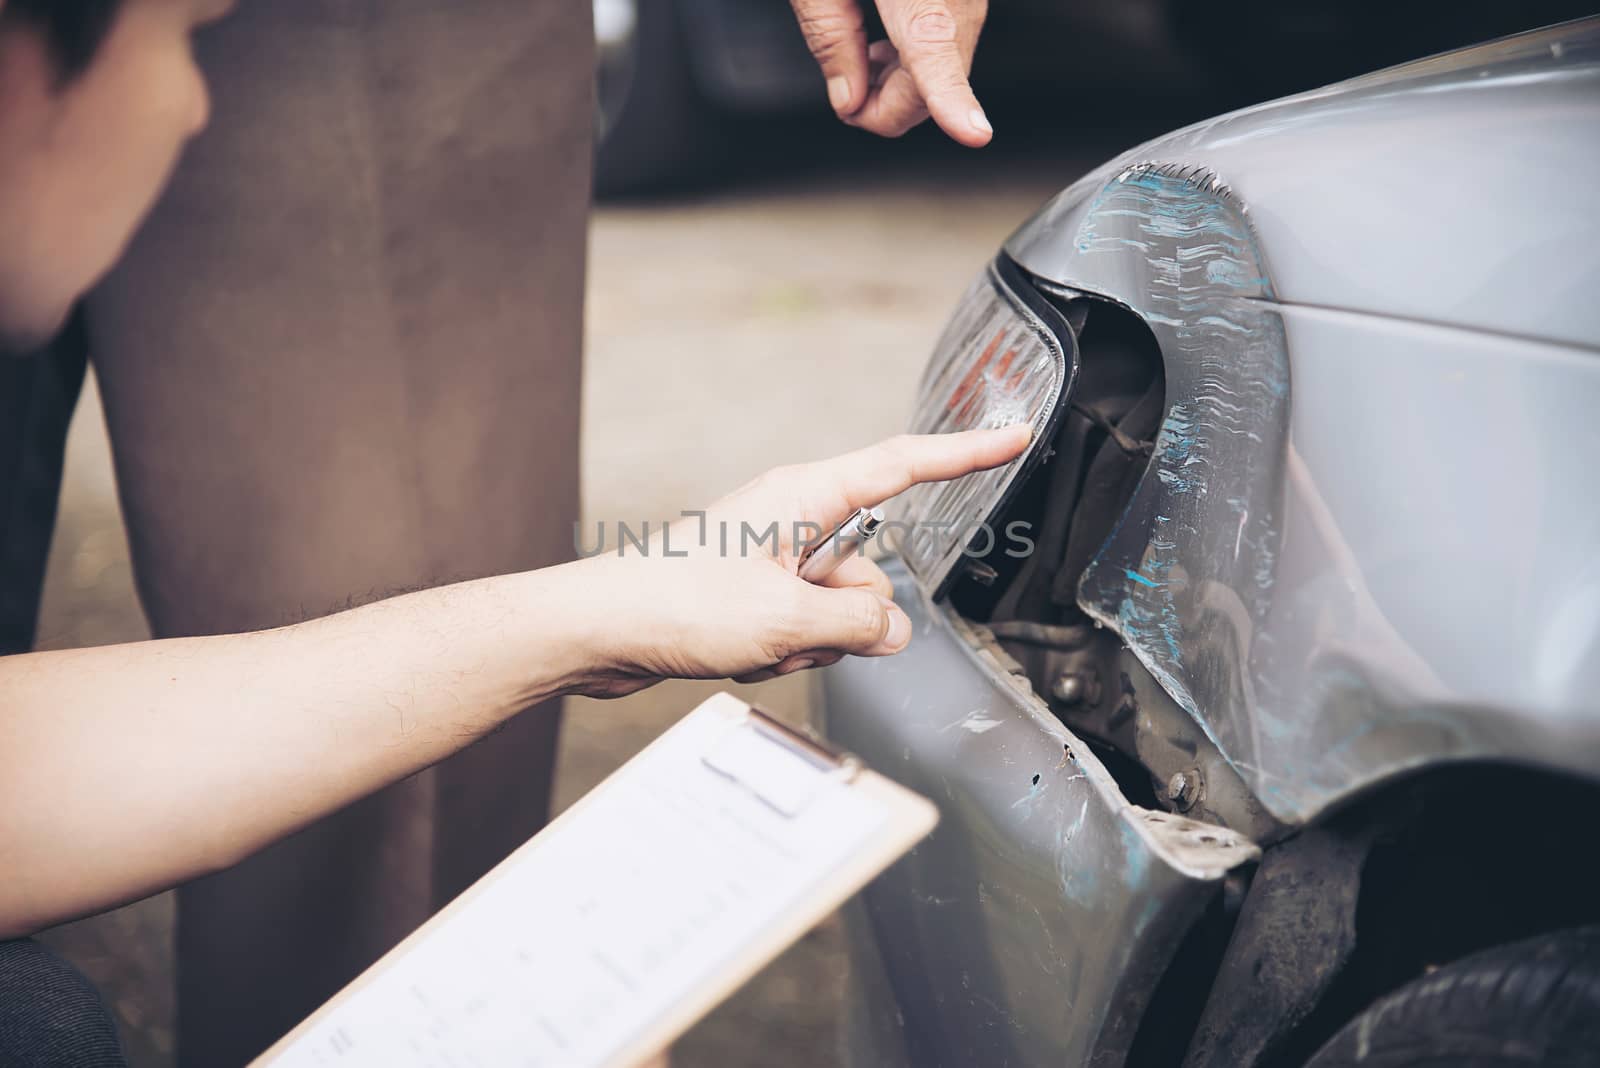 Insurance agent working during on site car accident claim process - people and car insurance claim concept